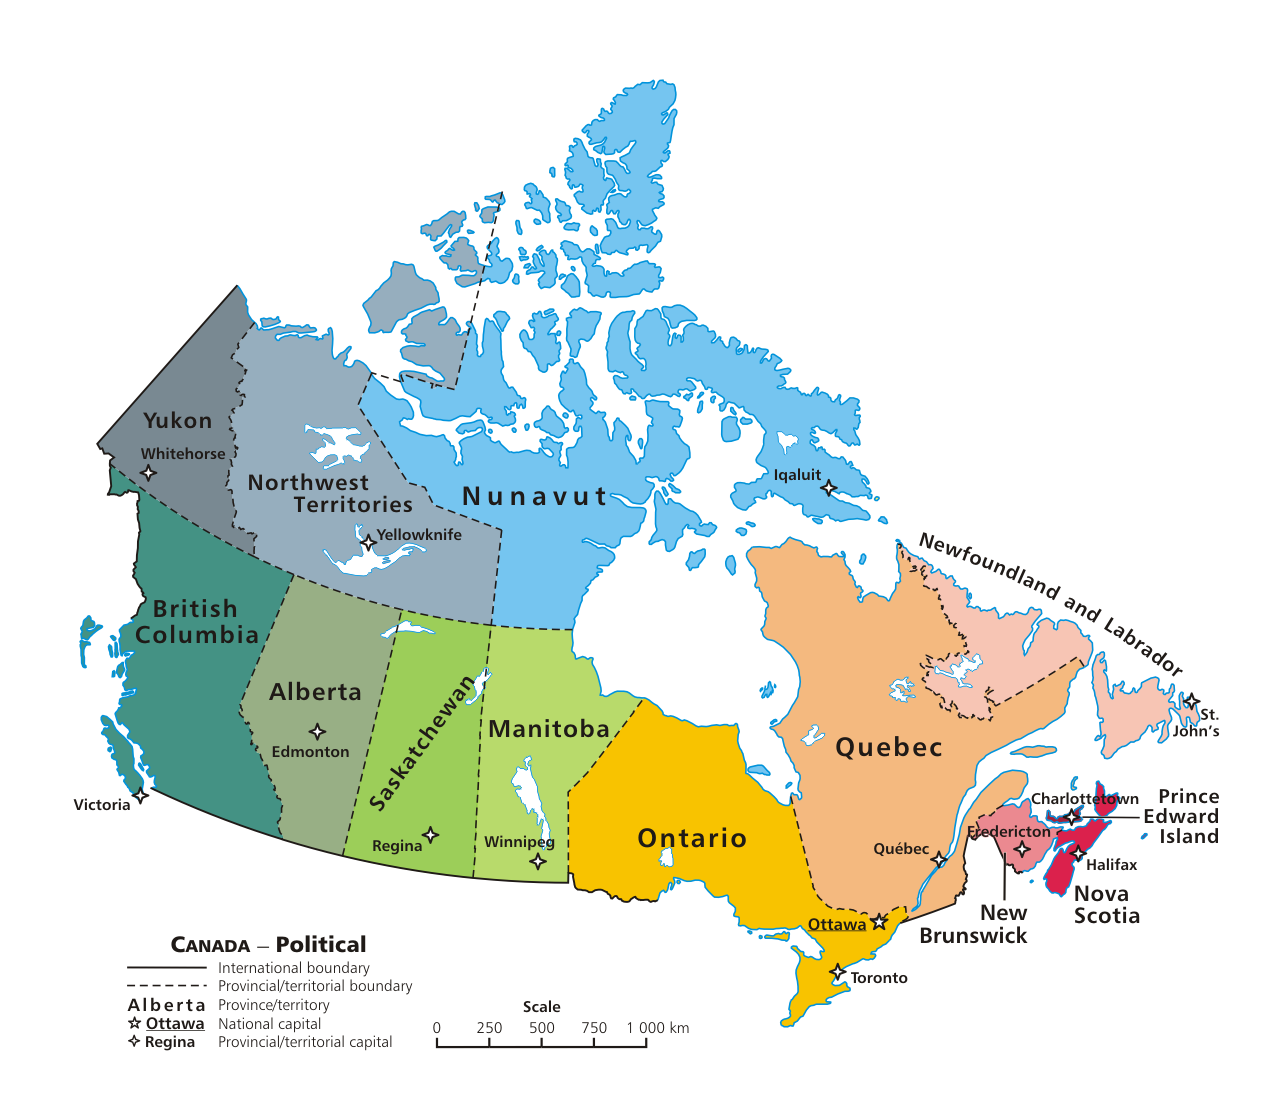 canadian lowlands map